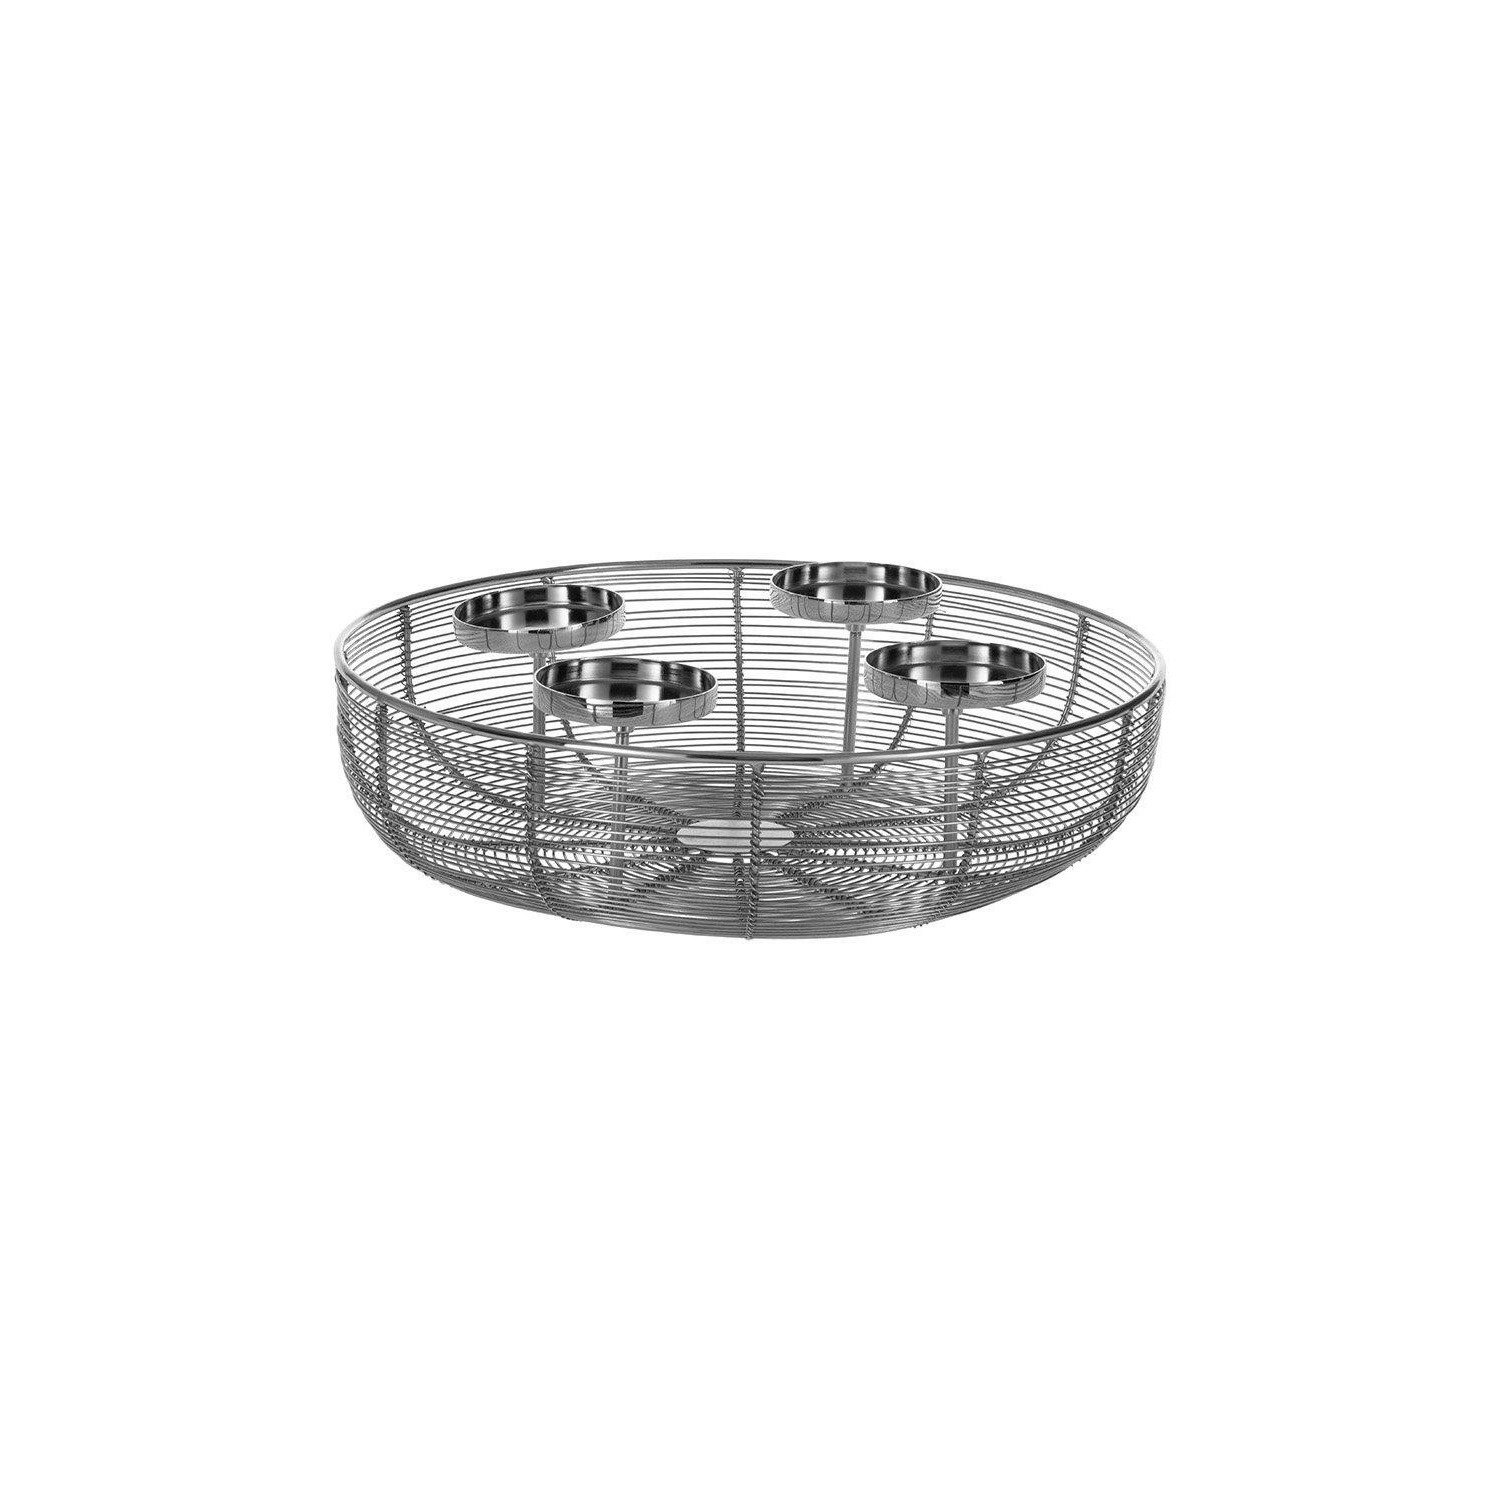 Hagony 4-Piece Candleholder With Silver Wireframe Bowl - image 1